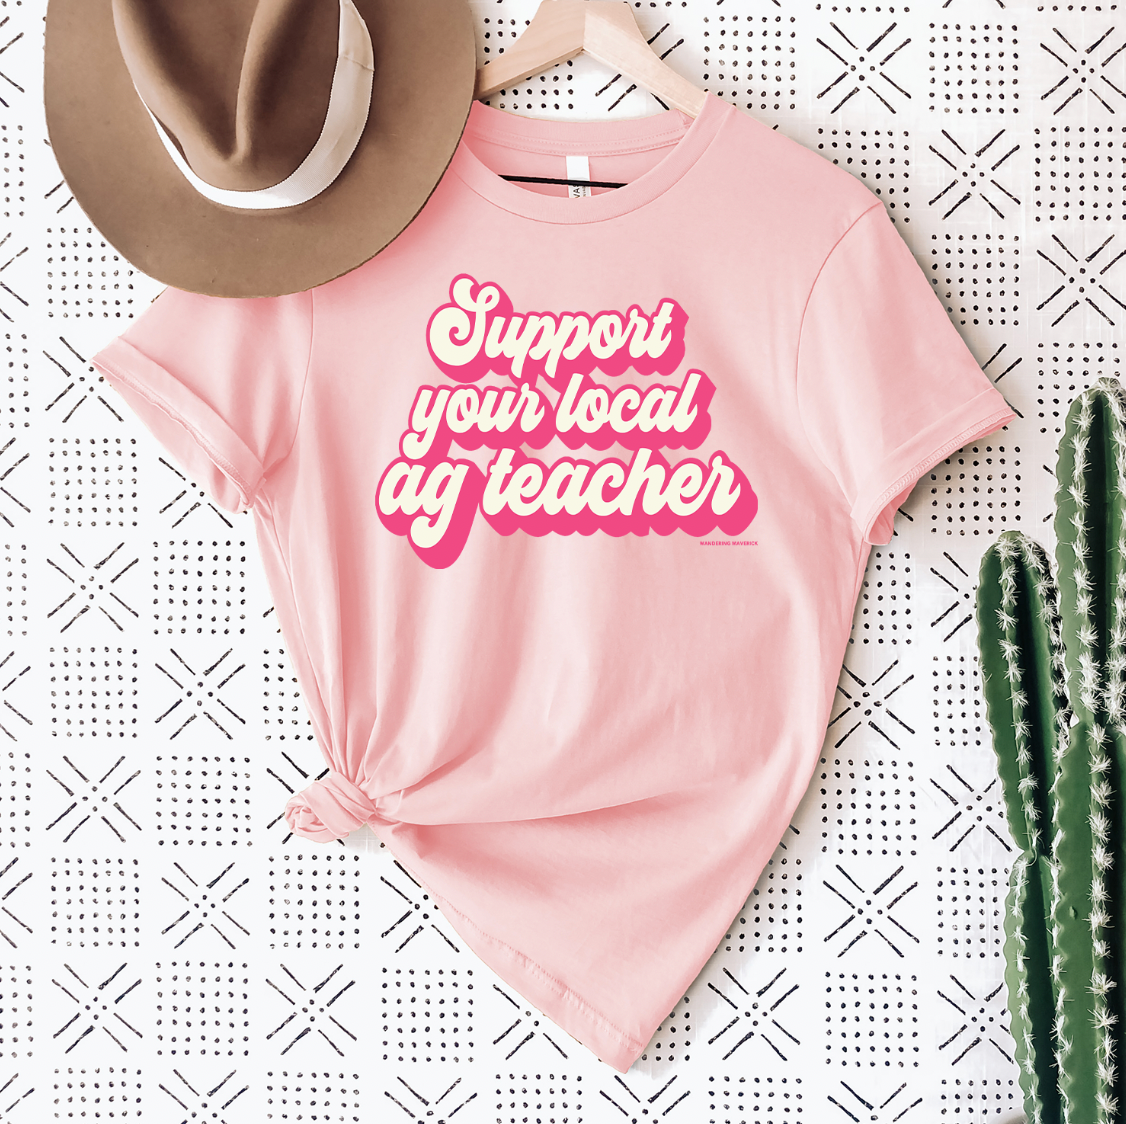 Retro Support Your Local AG Teacher Pink Ink T-Shirt (XS-4XL) - Multiple Colors!